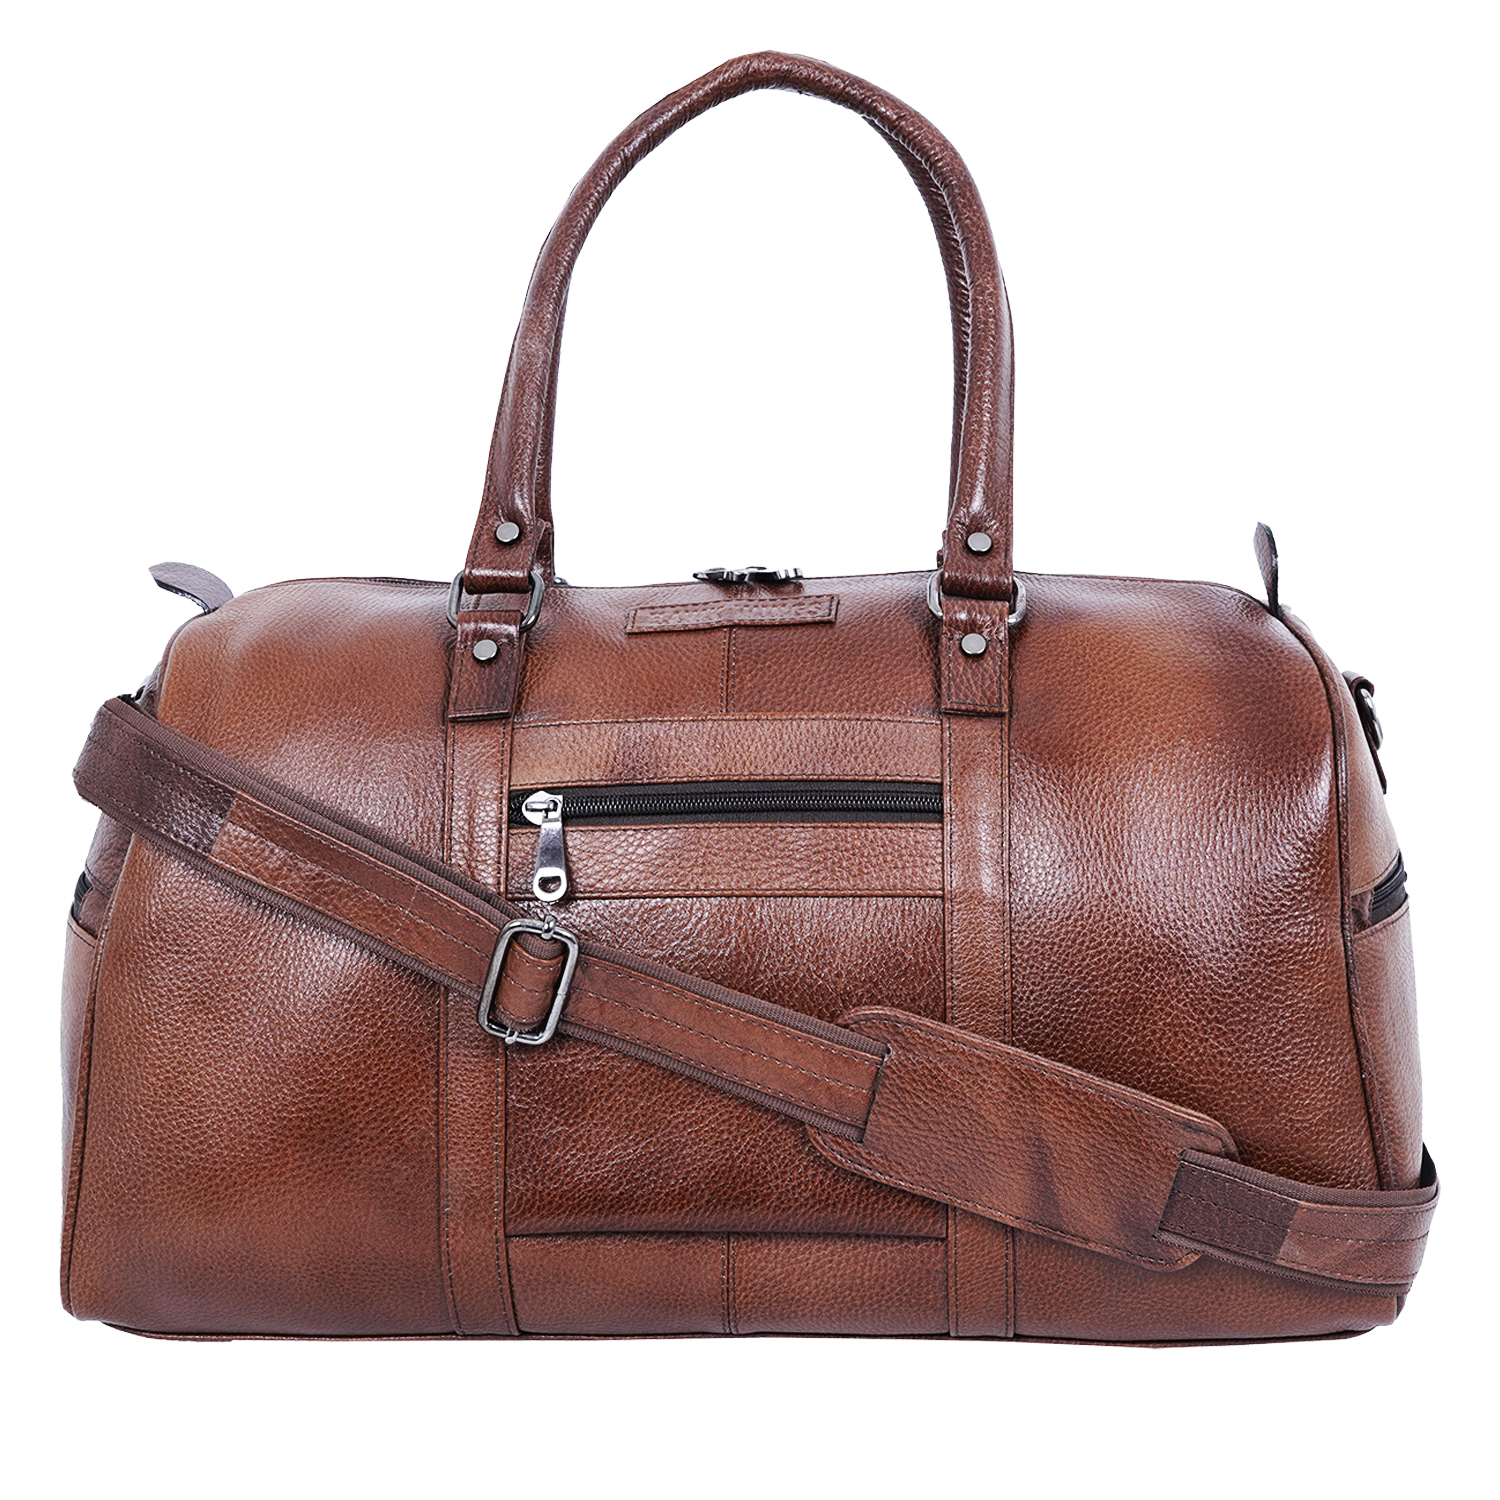 Leather Travel Duffle Bag for Men Women - Leather Duffel Carry on Overnight Weekender Bags Tan